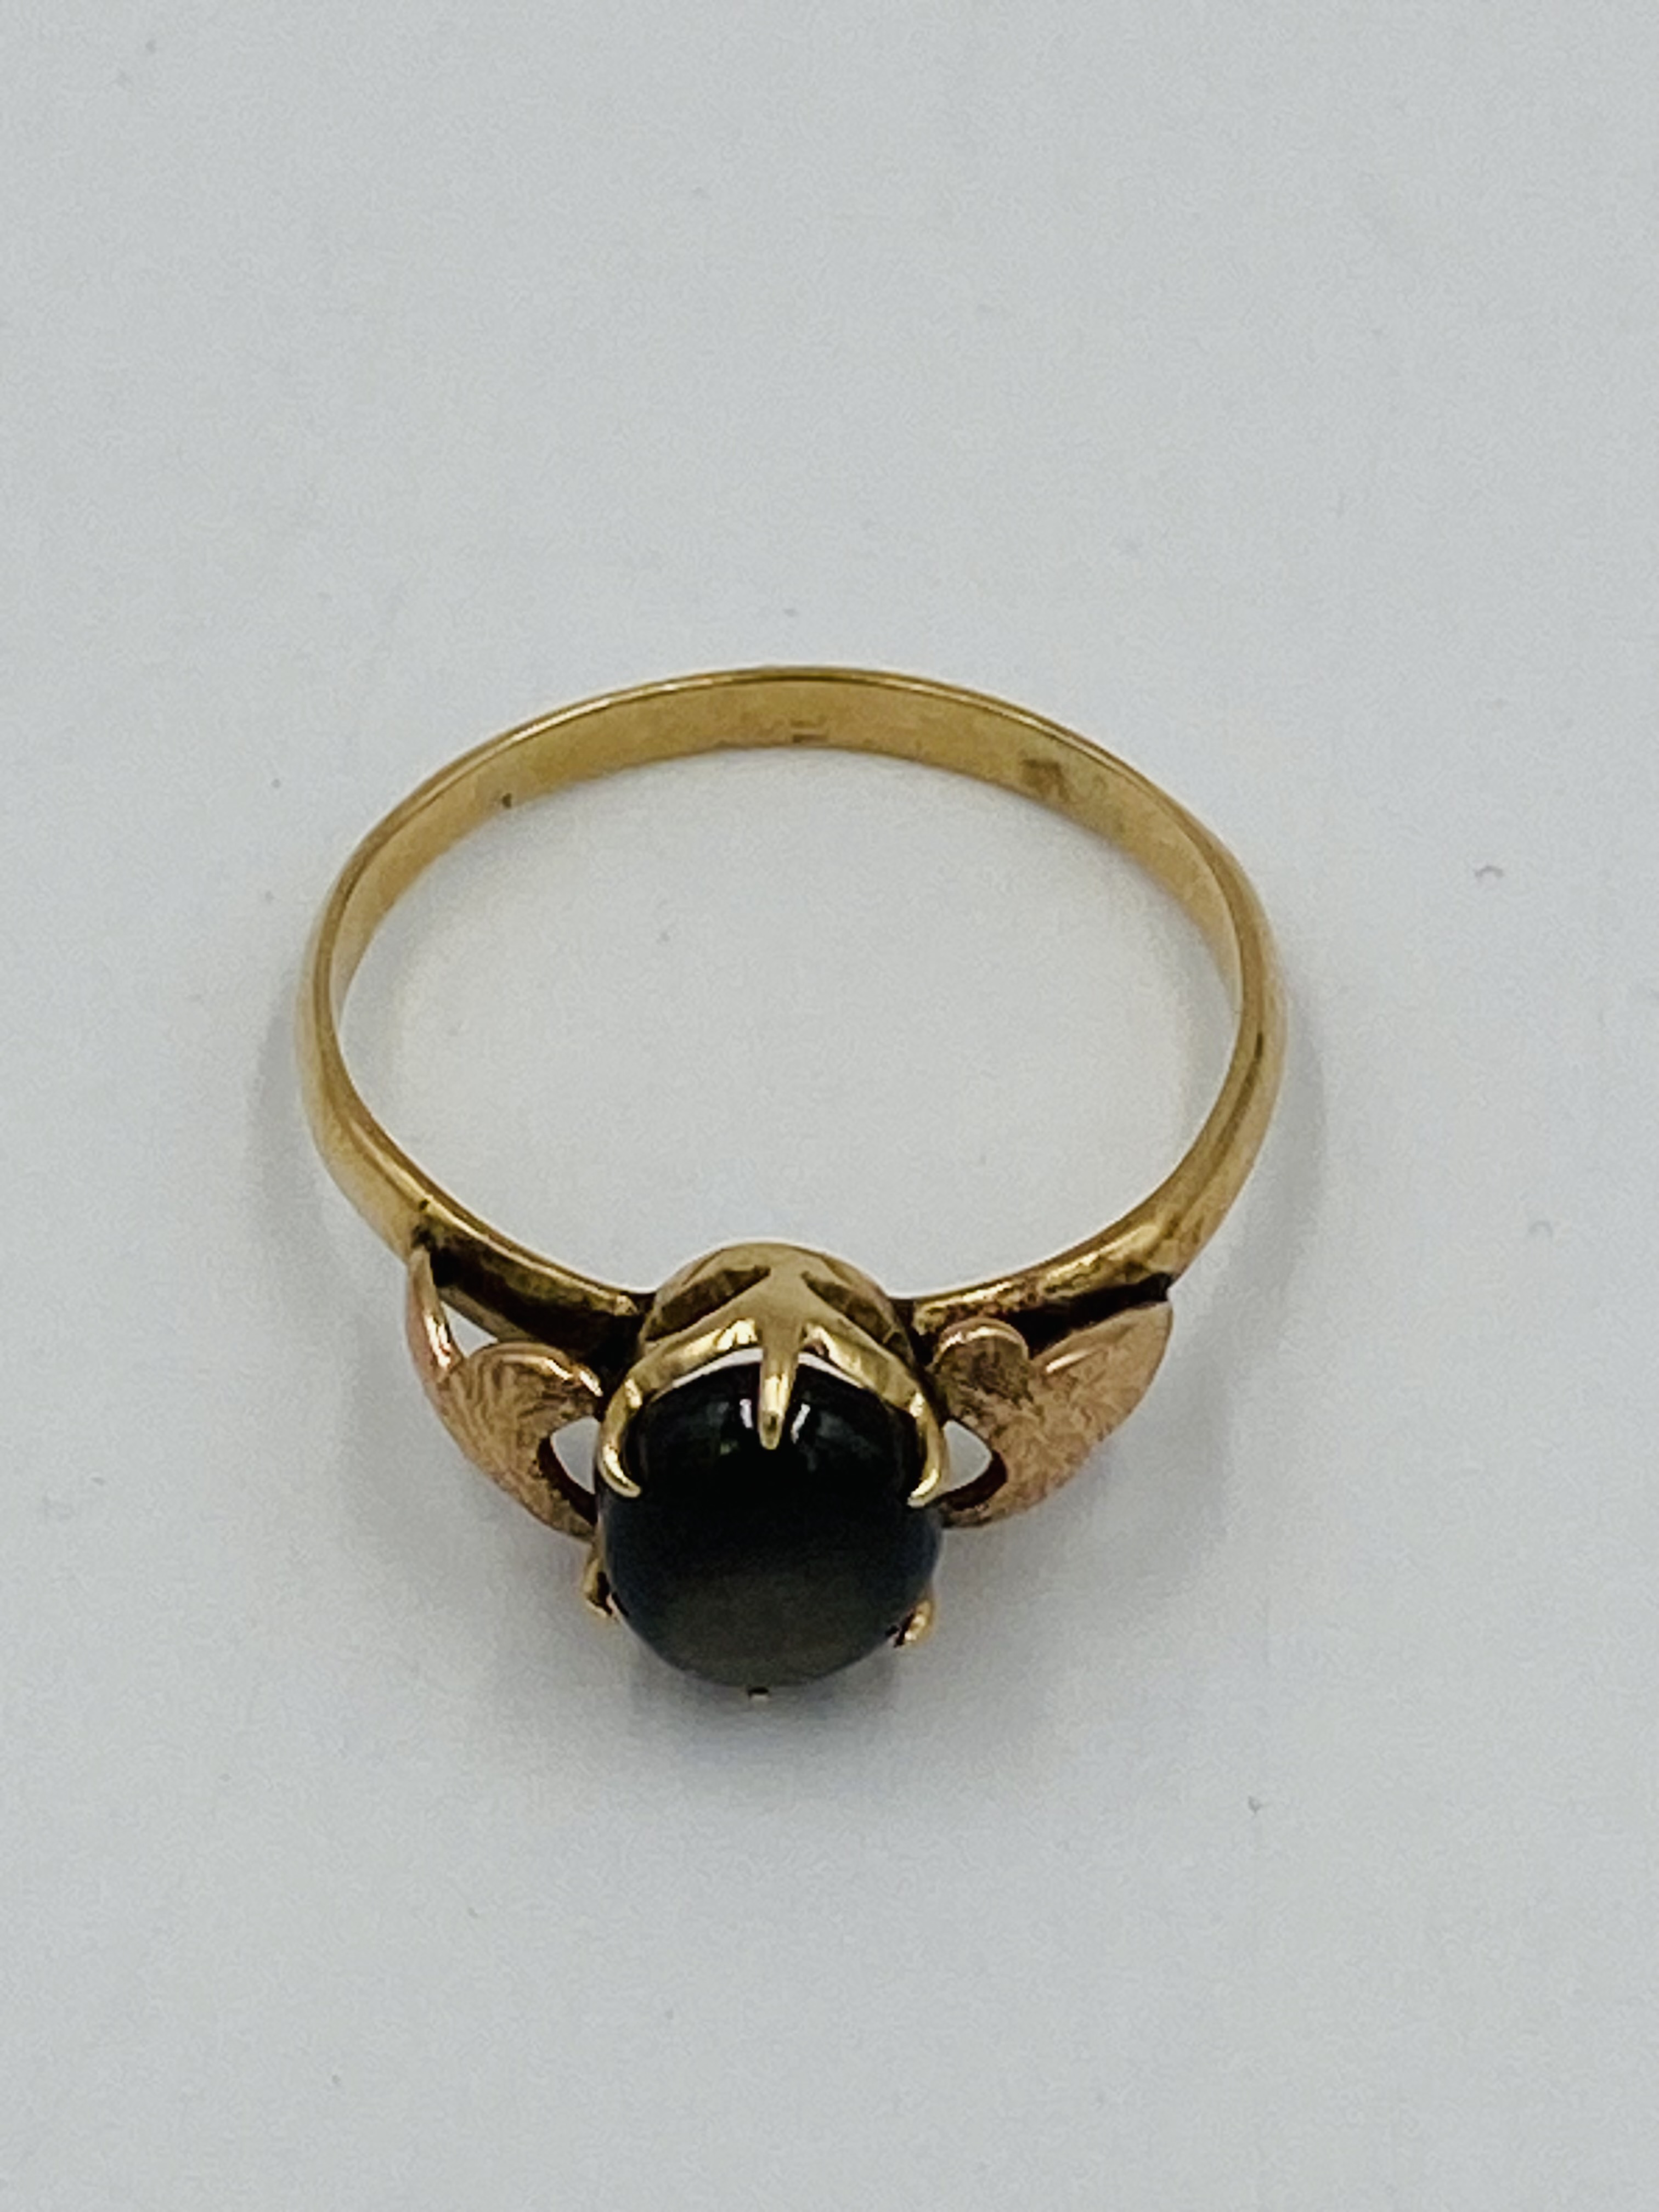 9ct gold ring set with a sapphire cabochon